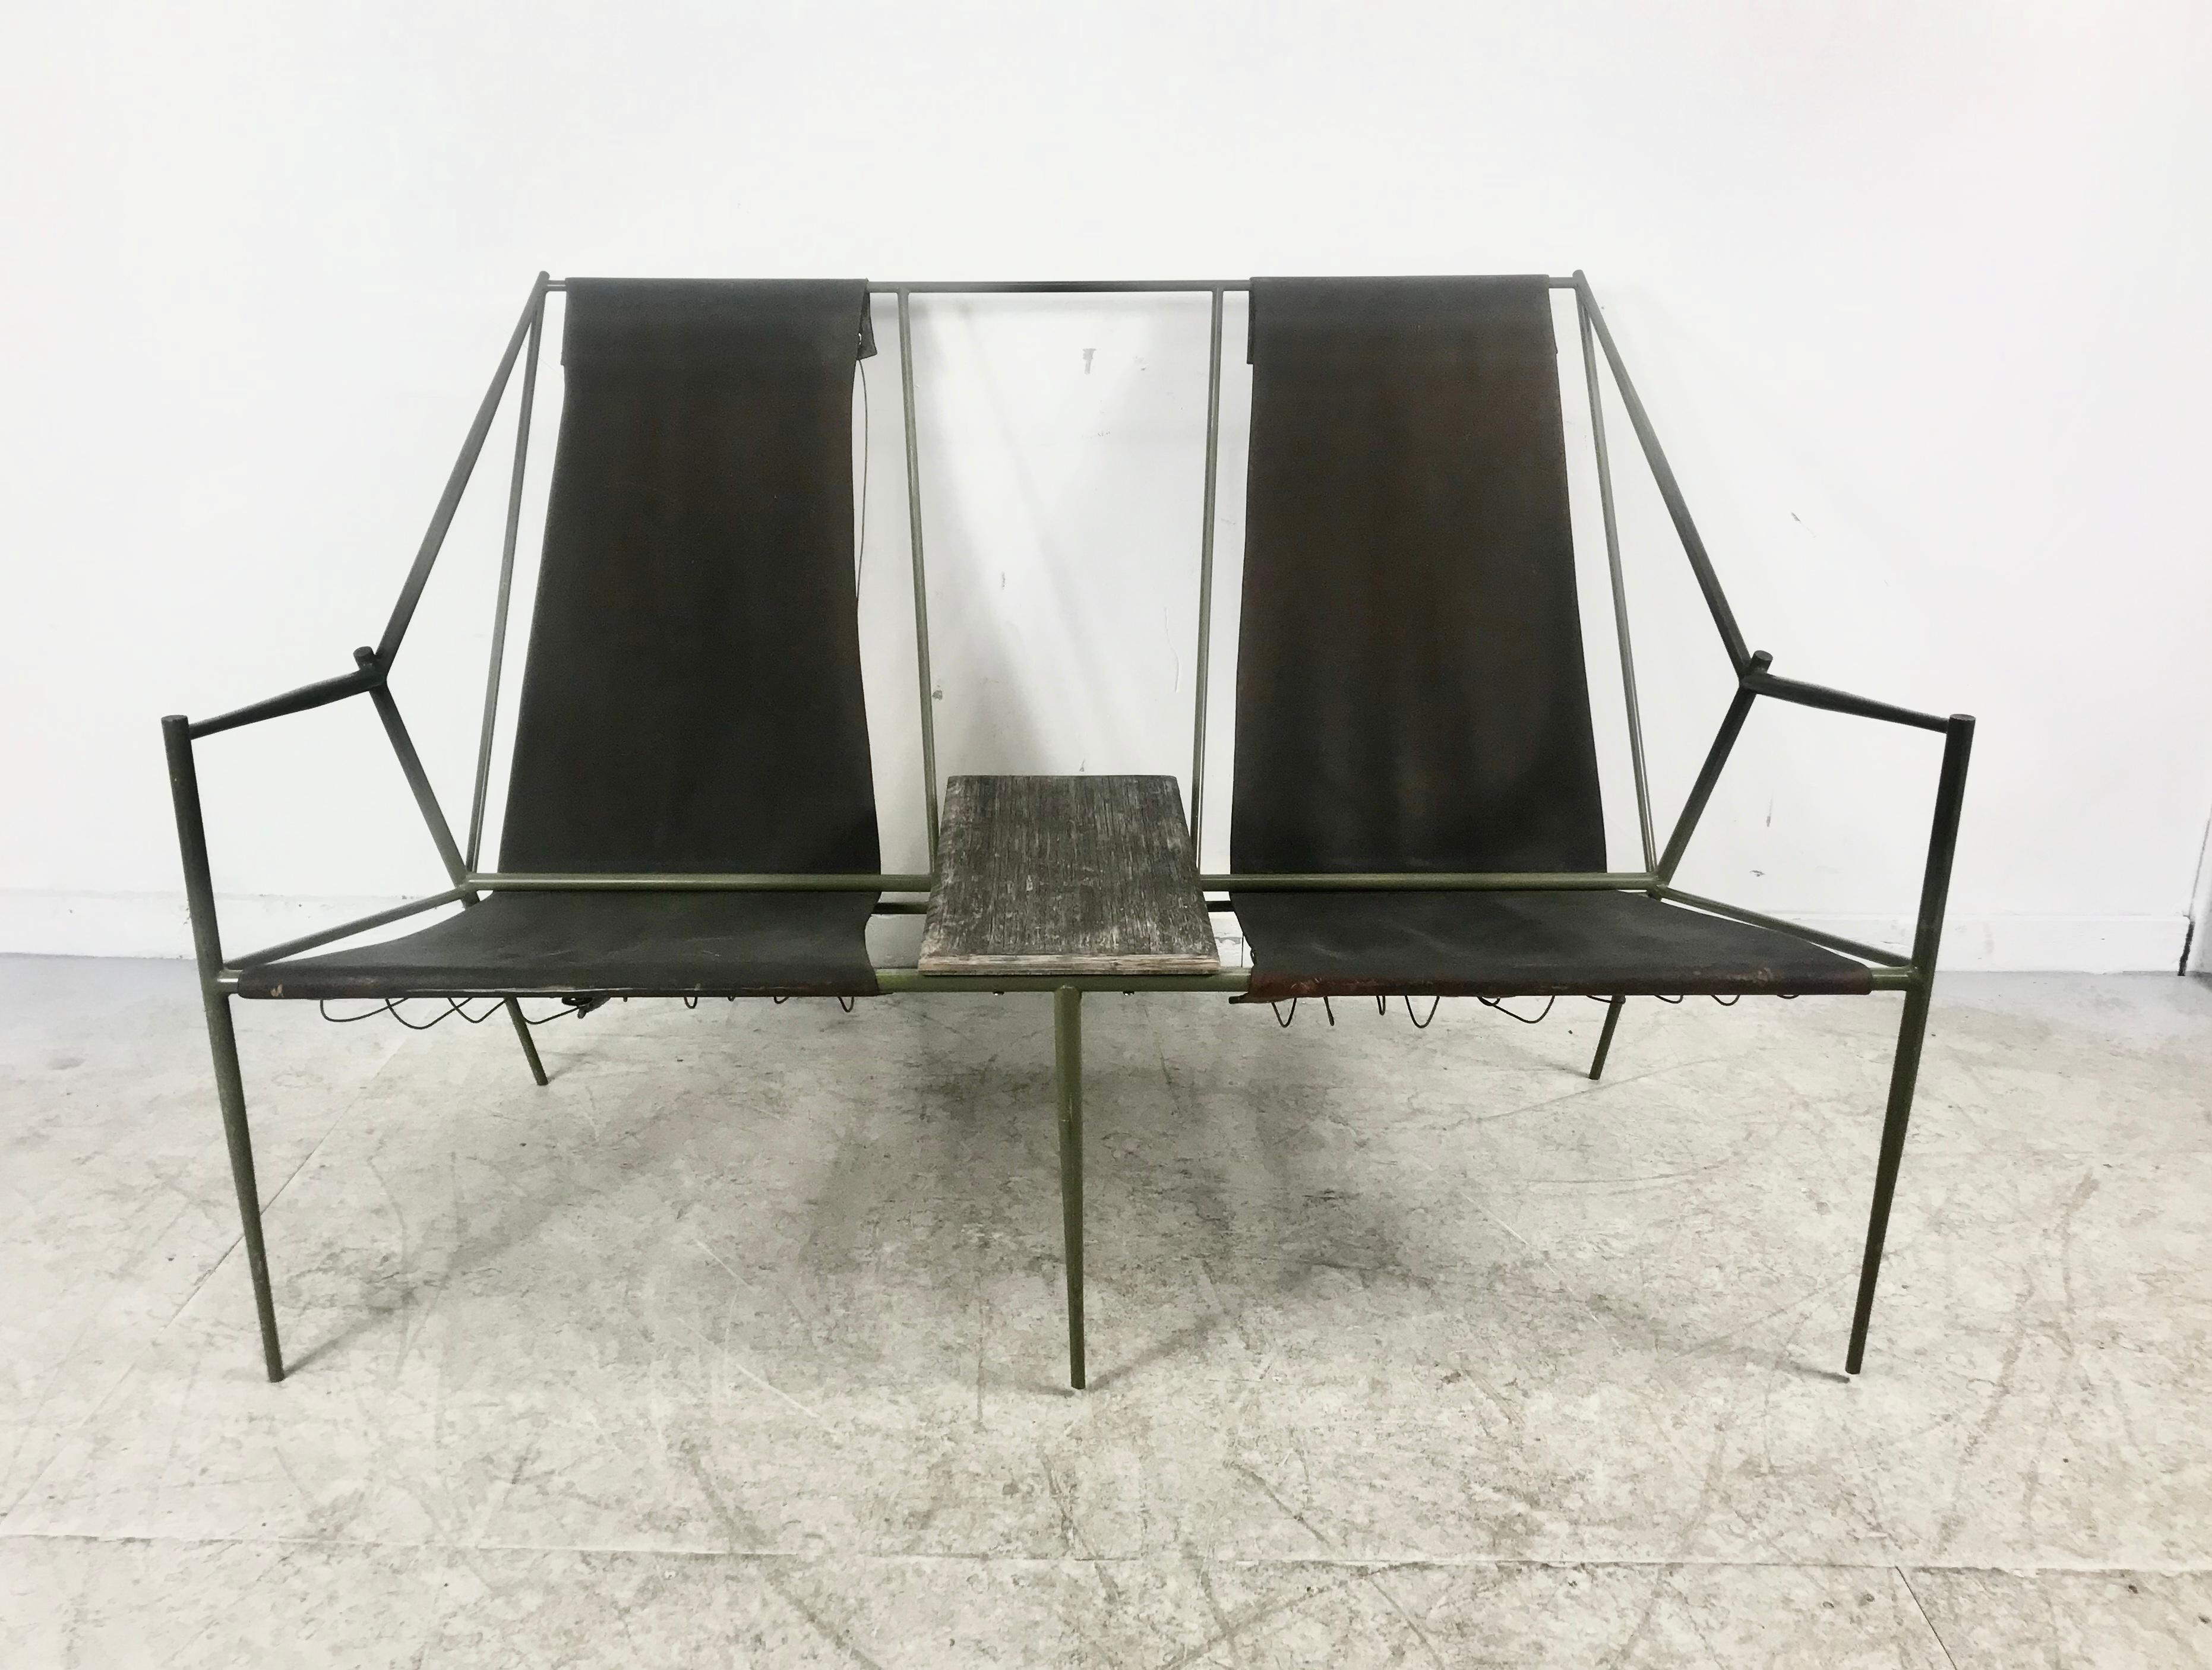 Stunning French modernist iron / leather two-seat sling garden seating with center table. Stunning design, sculpture, reminiscent of amazing designs by Jacques Adnet. Light moss green painted iron frame, Geometric design. Two leather slings with